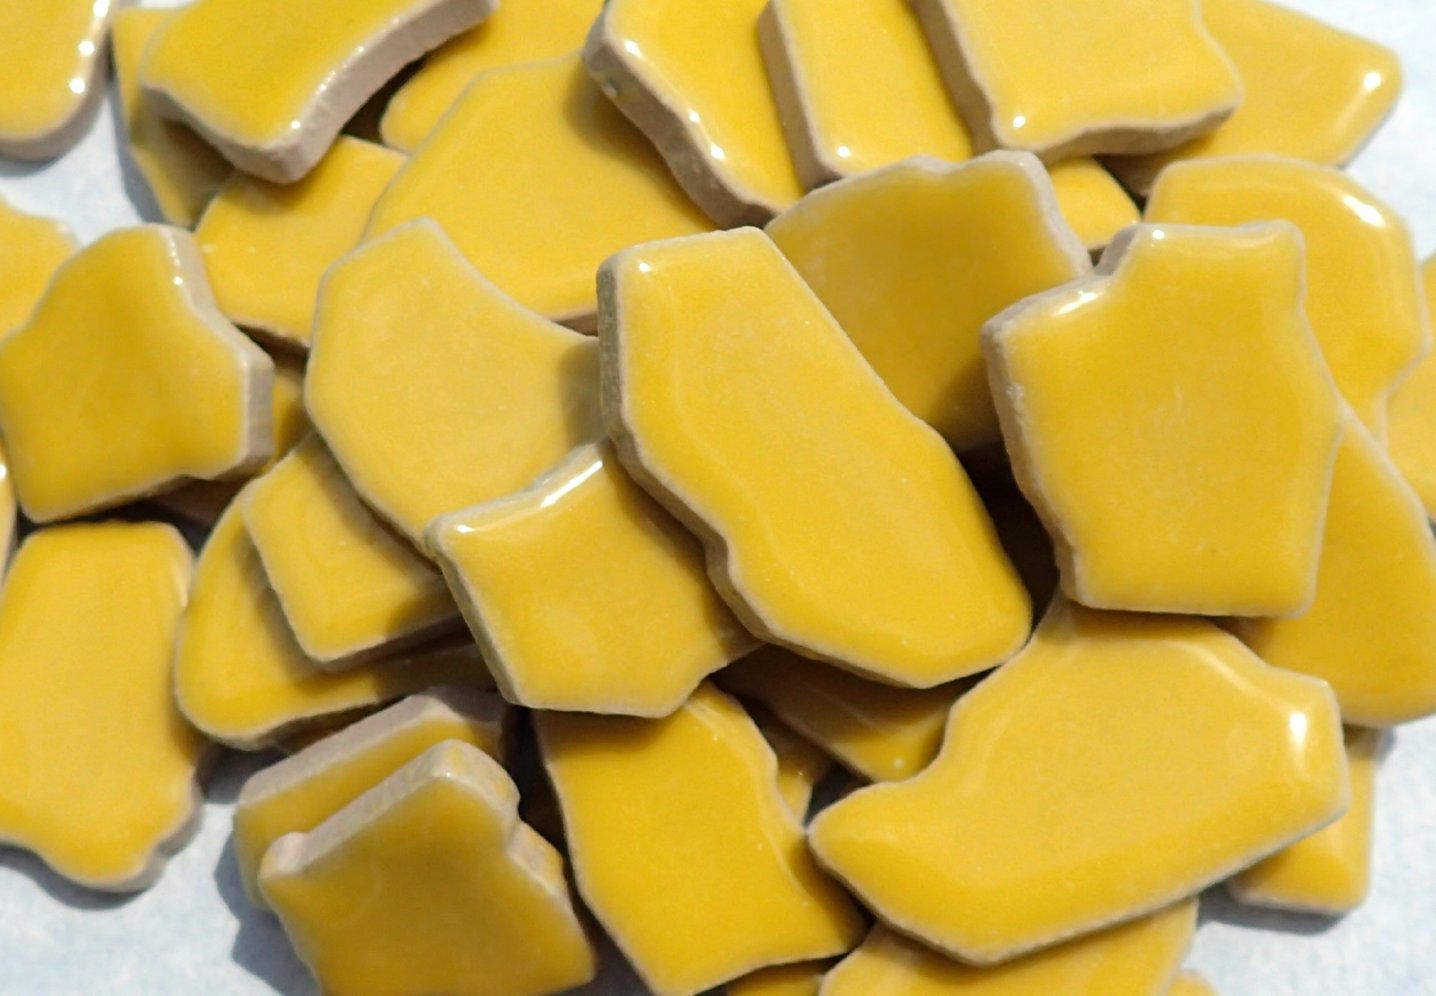 Yellow Mosaic Ceramic Tiles - Random Shapes - Half Pound - Assorted Sizes Jigsaw Puzzle Shaped Pieces